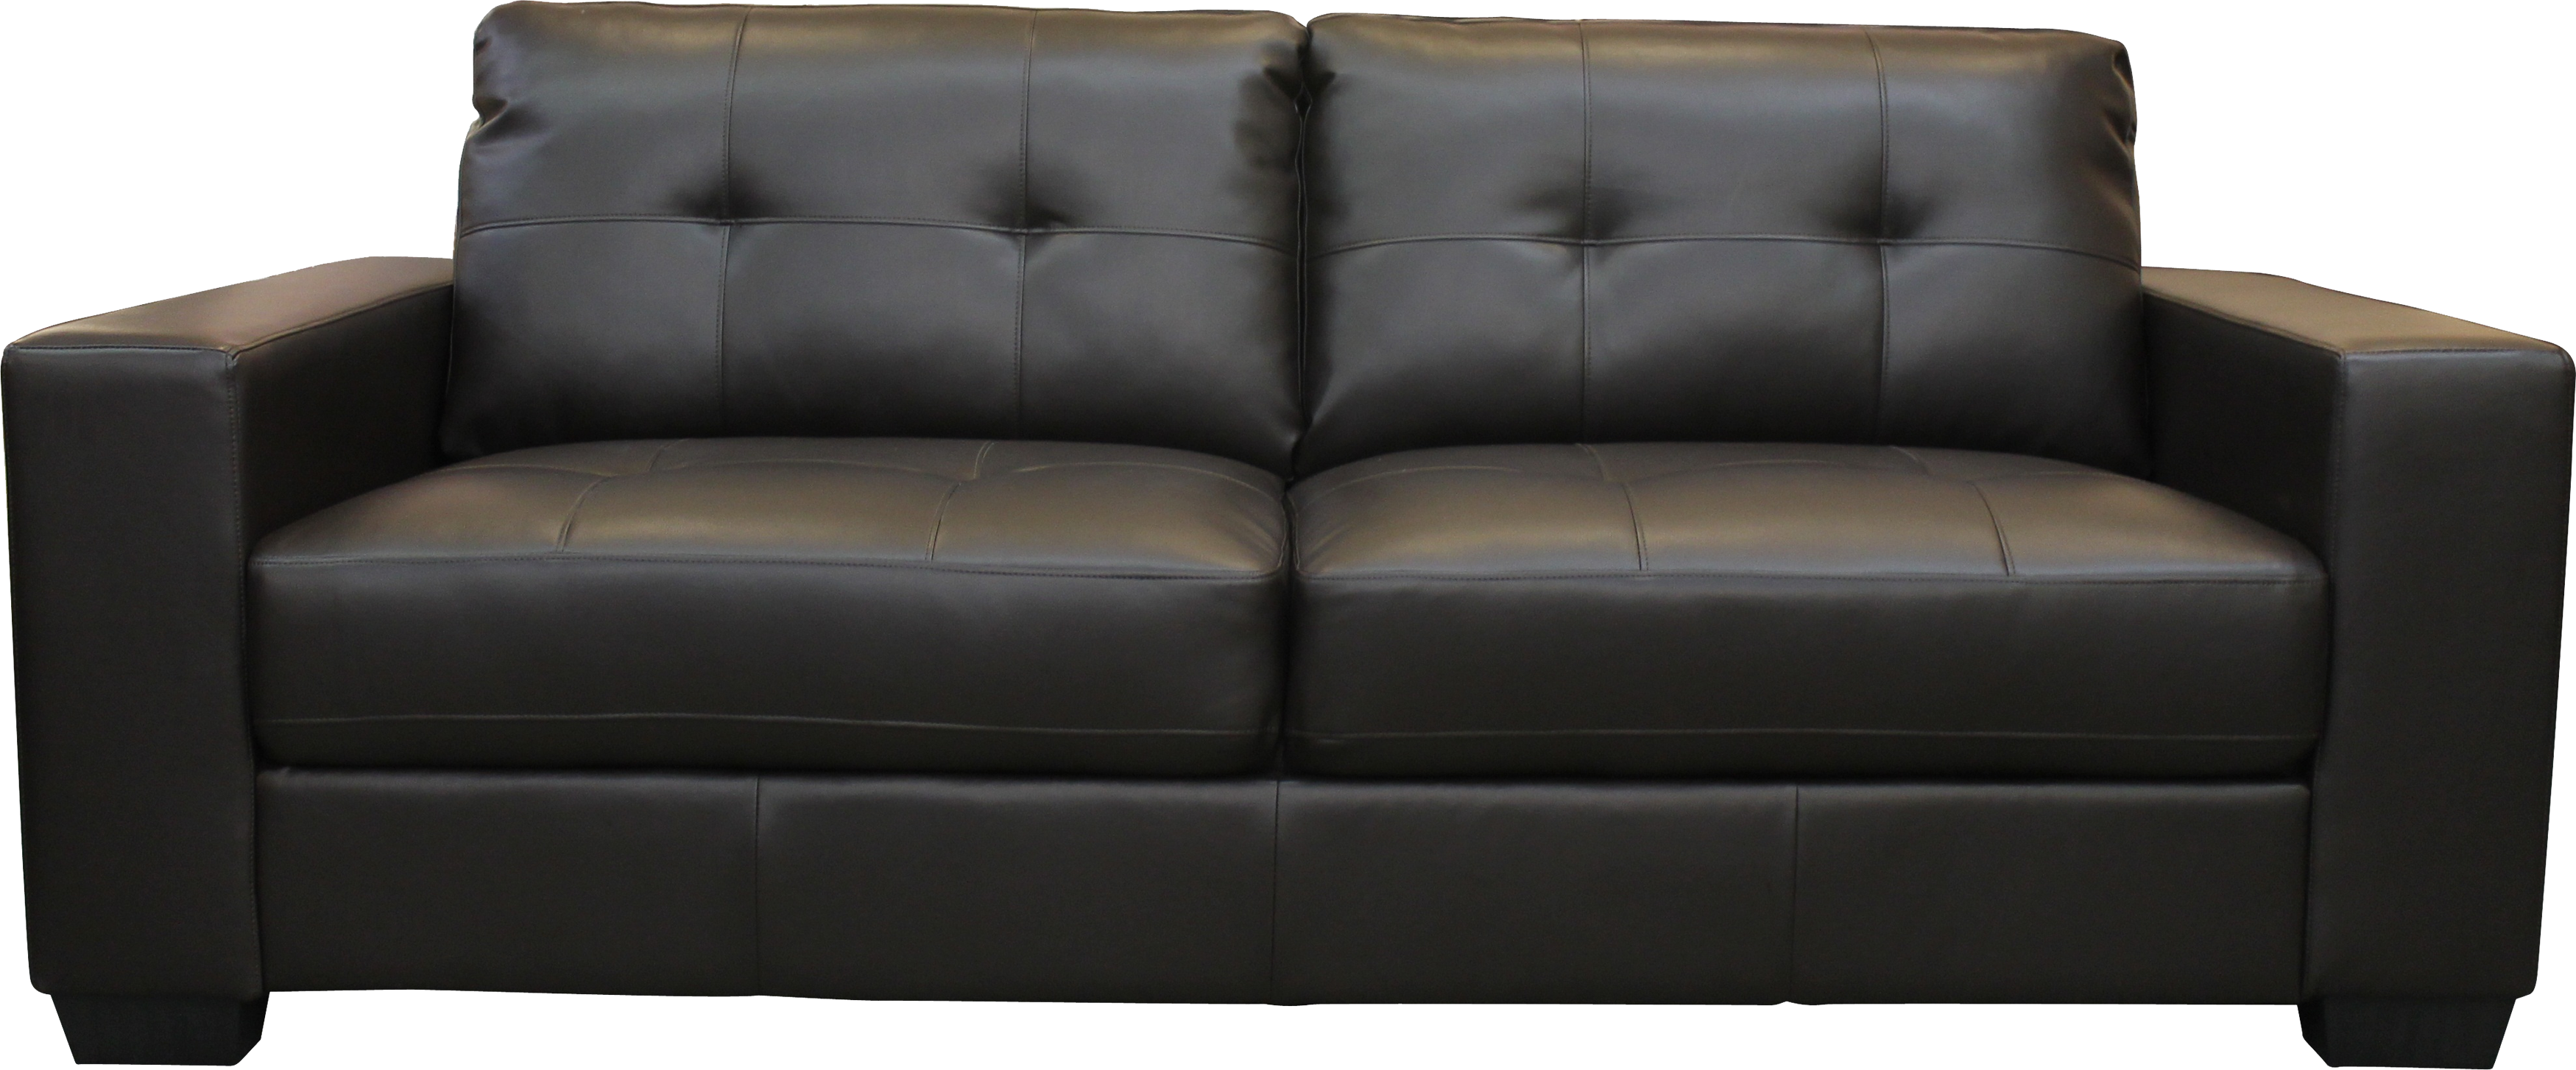 Sofa Chaise Longue PNG Pic